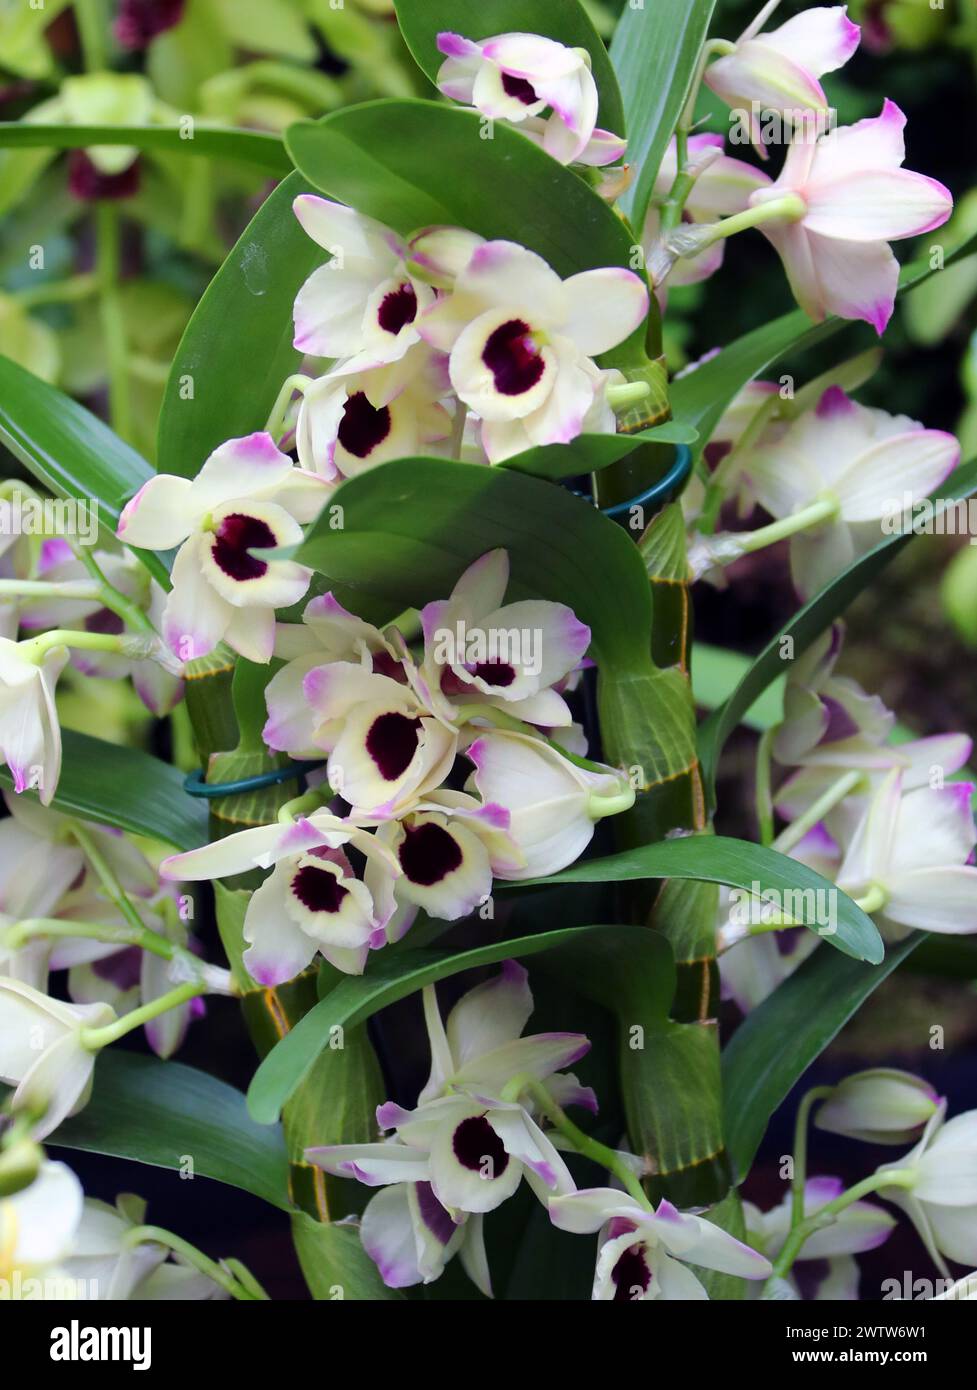 Orchid, Dendrobium Sunny Eyes, Dendrobiinae, Orchidaceae. Dendrobium is a genus of mostly epiphytic and lithophytic orchids in the family Orchidaceae. Stock Photo